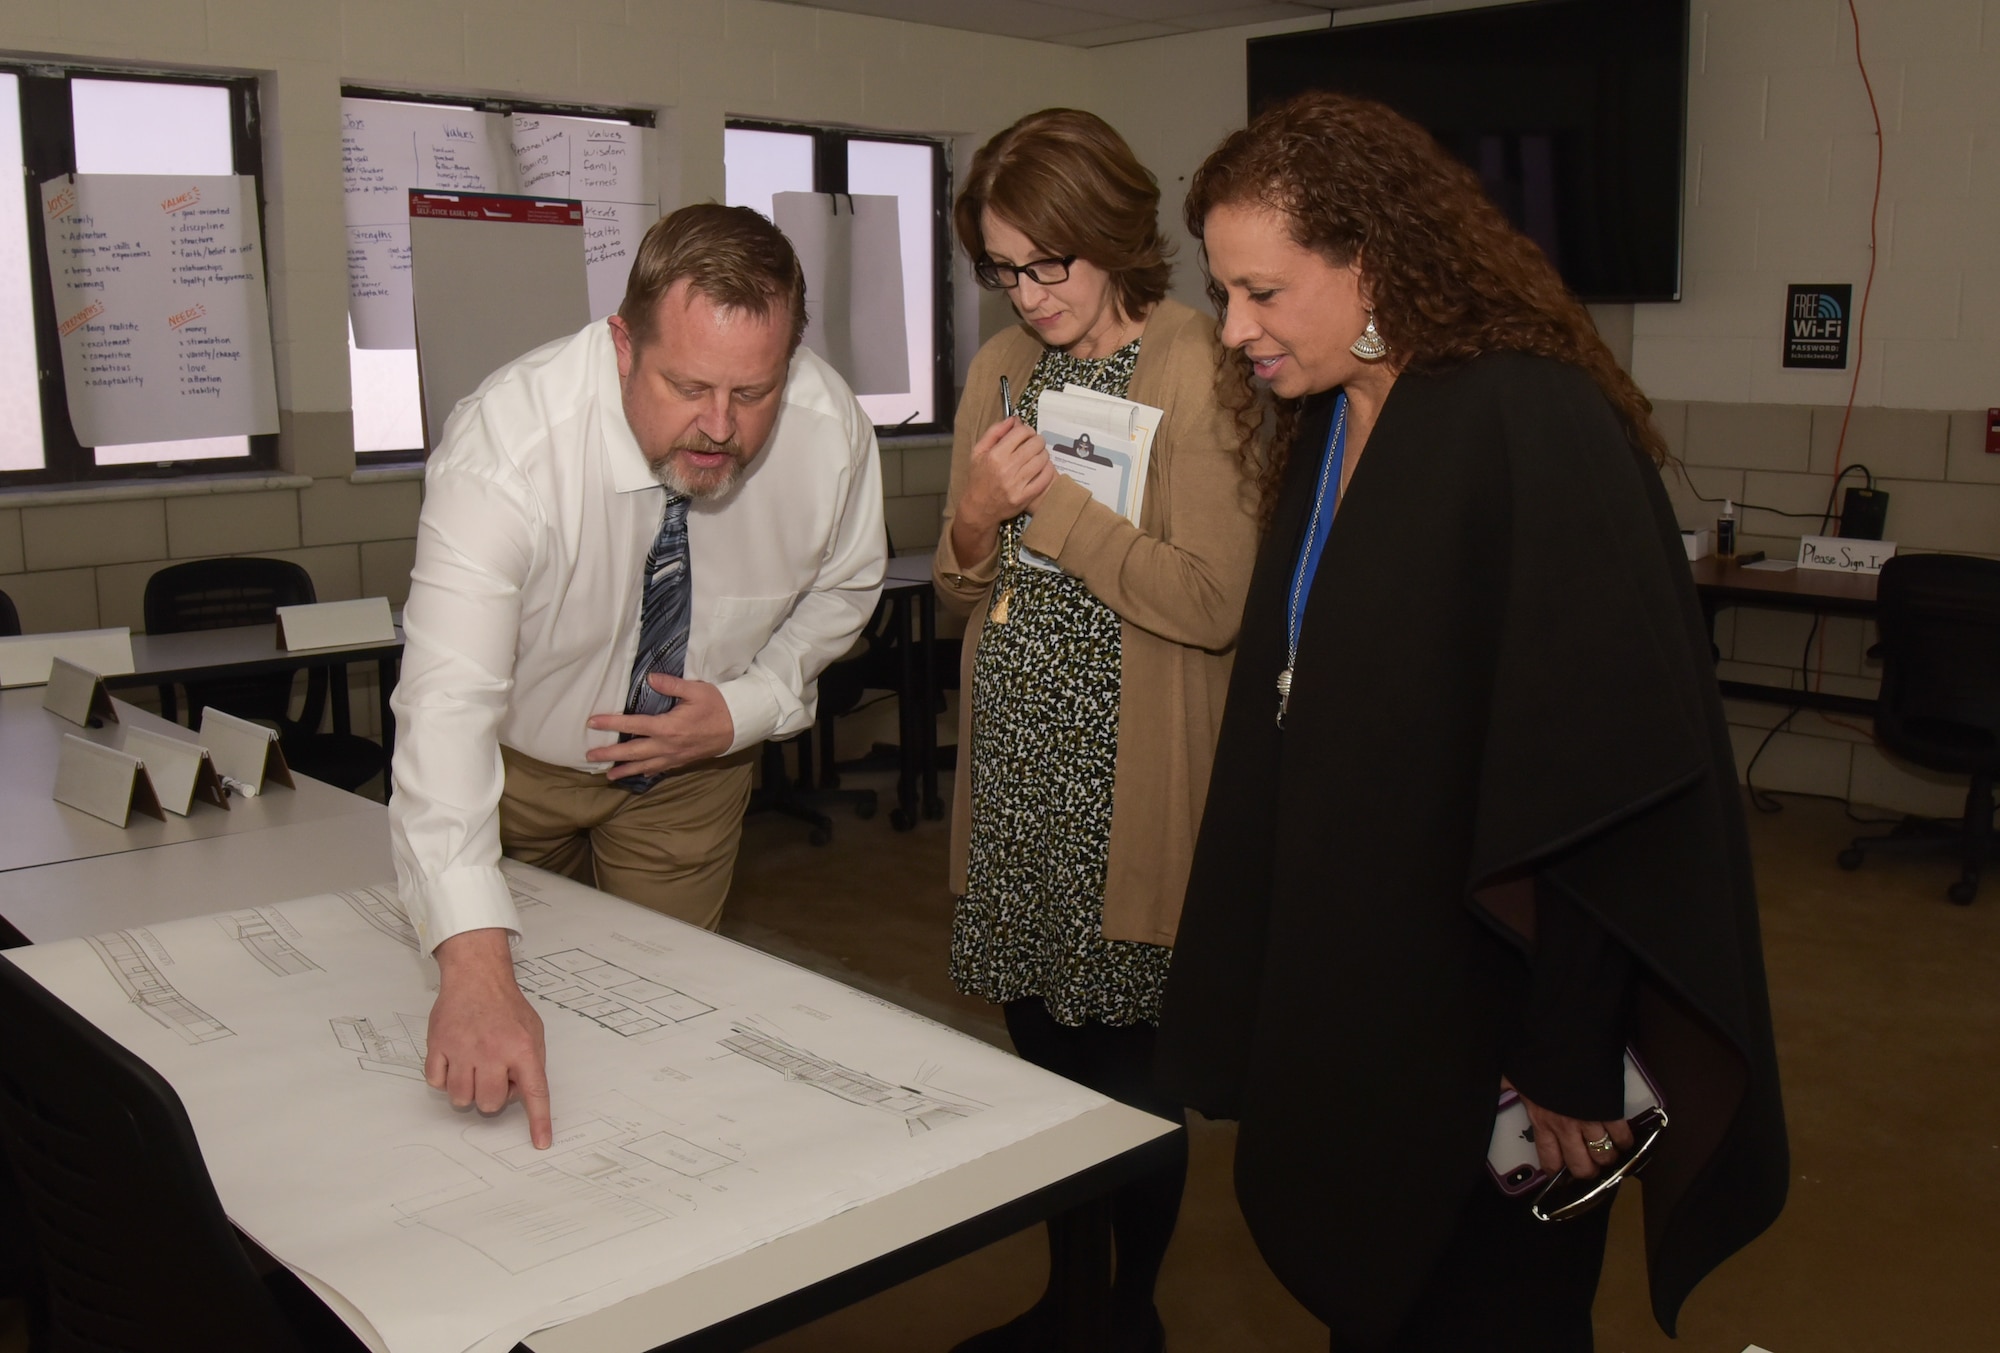 From left to right, Mr. David Conner, 460th Force Support Squadron Force Development Flight chief, Mrs. Tonia Shaw, the Combined Force Space Component commander, U.S. Space Command spouse, and Mrs. Alicia Pepper, the 460th Space Wing commander’s spouse looks at plans for the expansion of the Professional Development Campus on Buckley Air Force Base, Colo. Feb. 21, 2020.